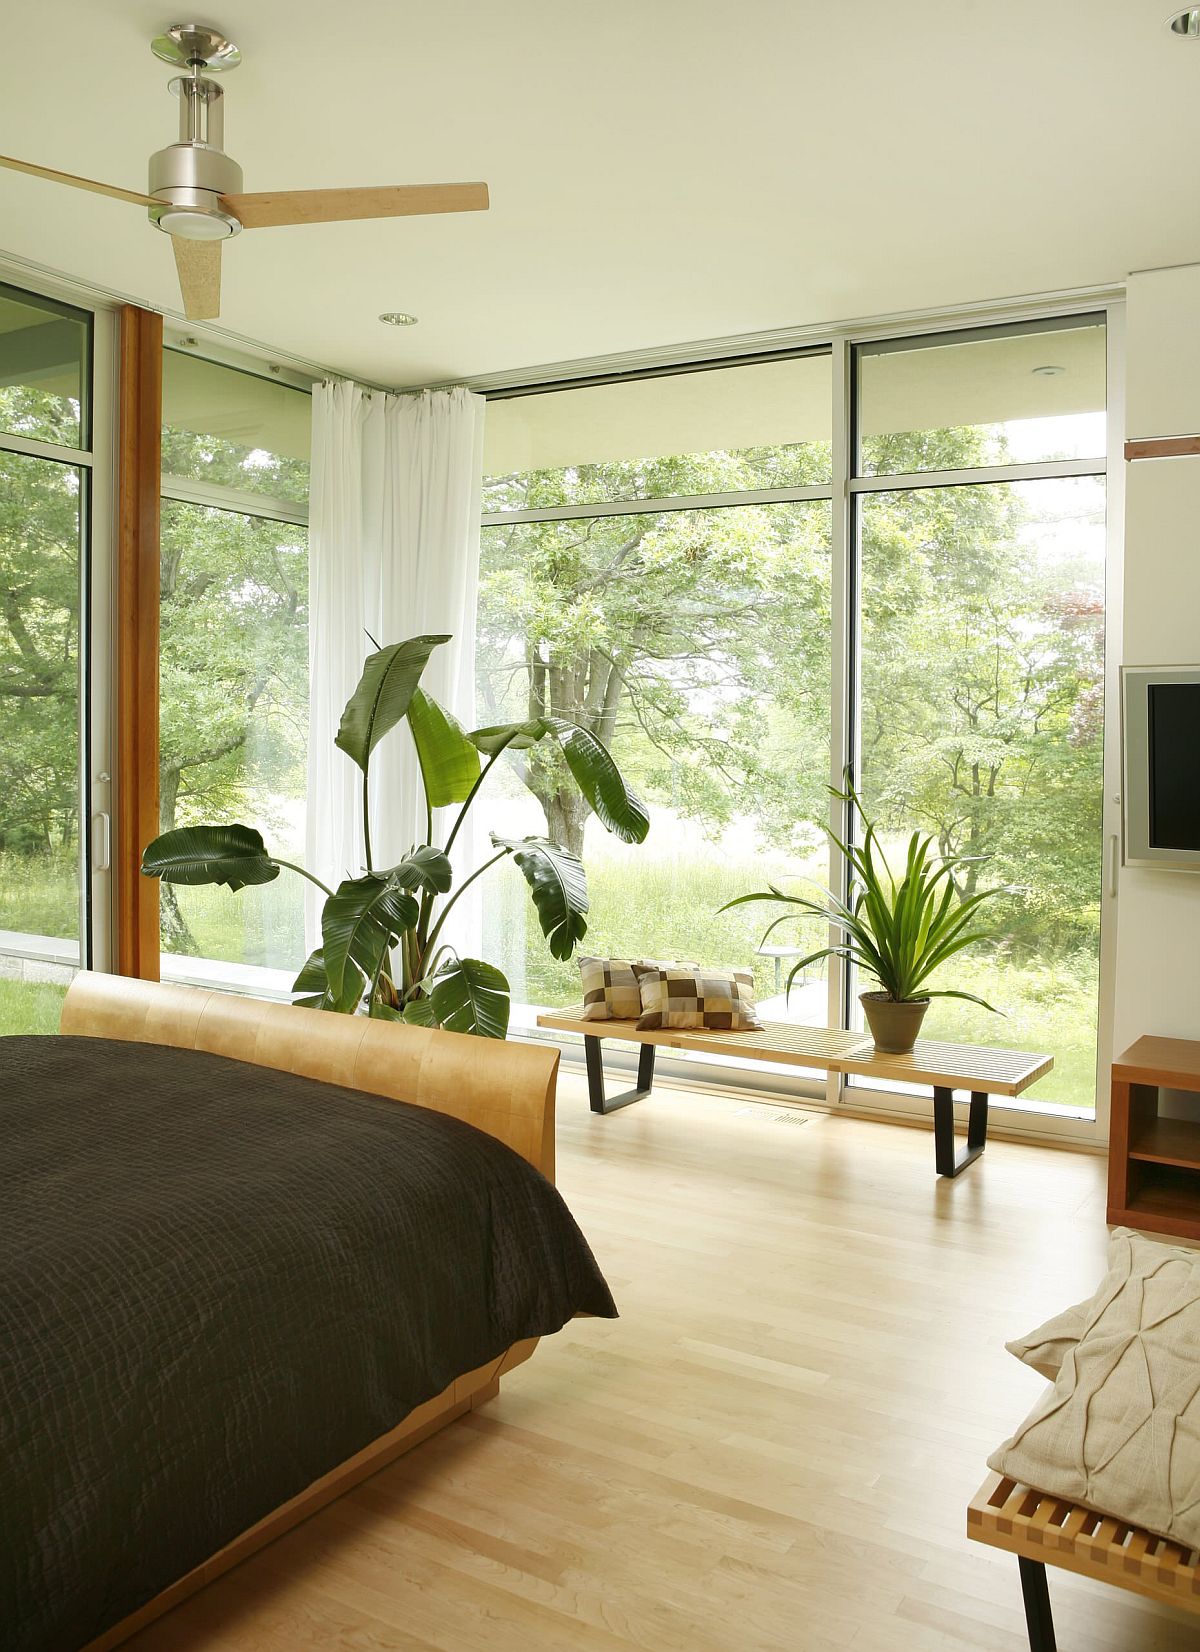 Bring-the-greenery-outside-indoors-with-sliding-glass-doors-and-glass-walls-62091